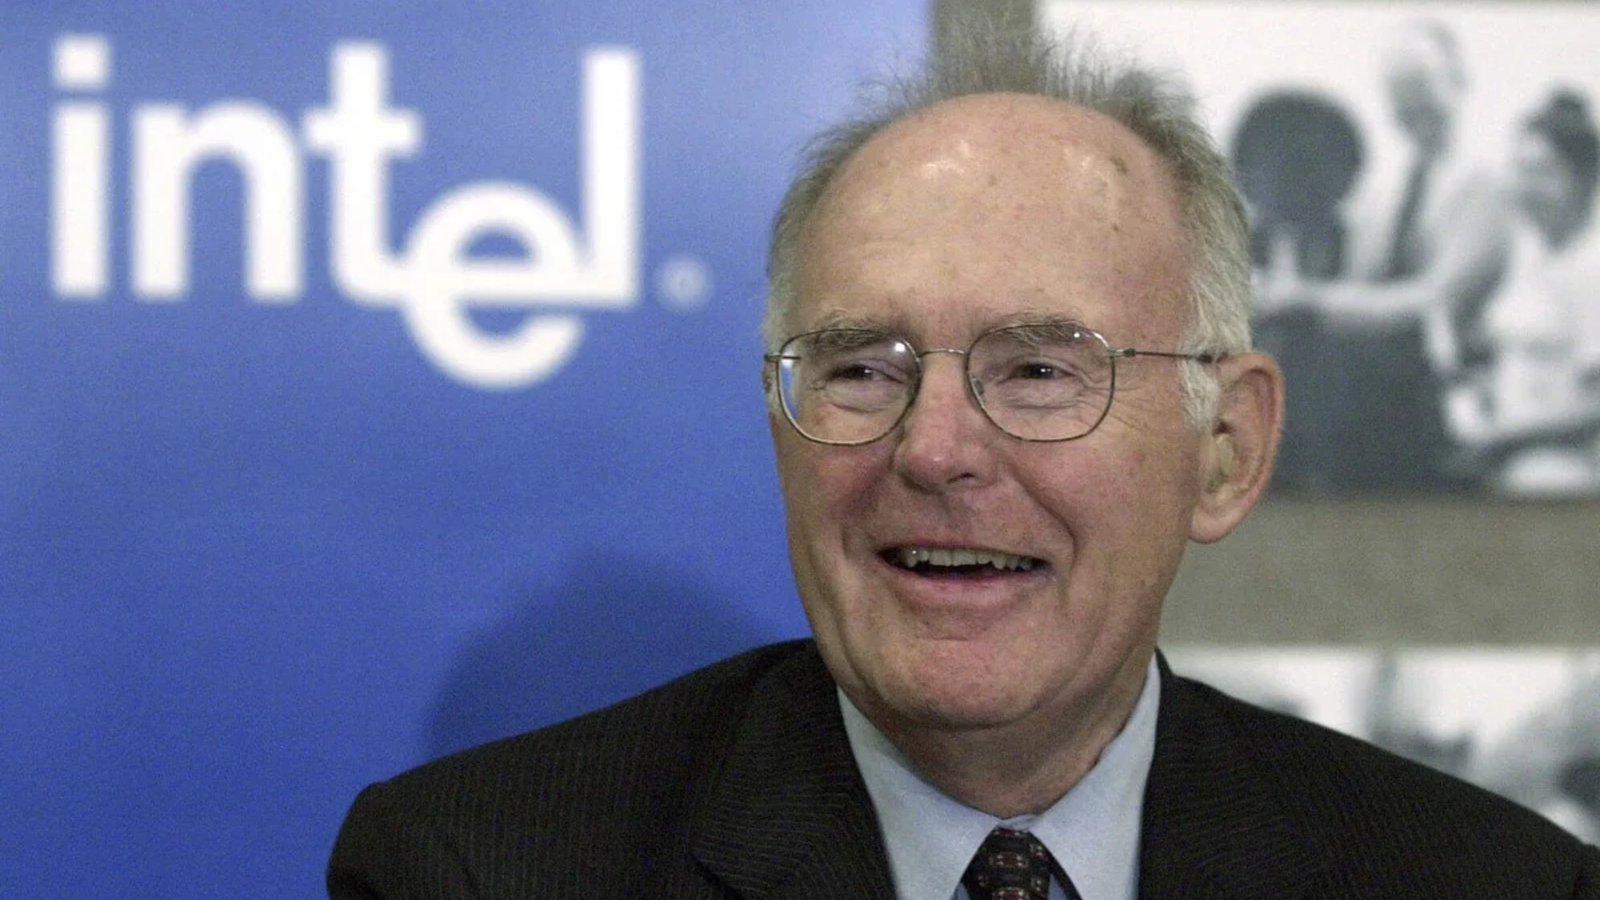 Gordon Moore, Intel Co-Founder, and Visionary, Dies at 94